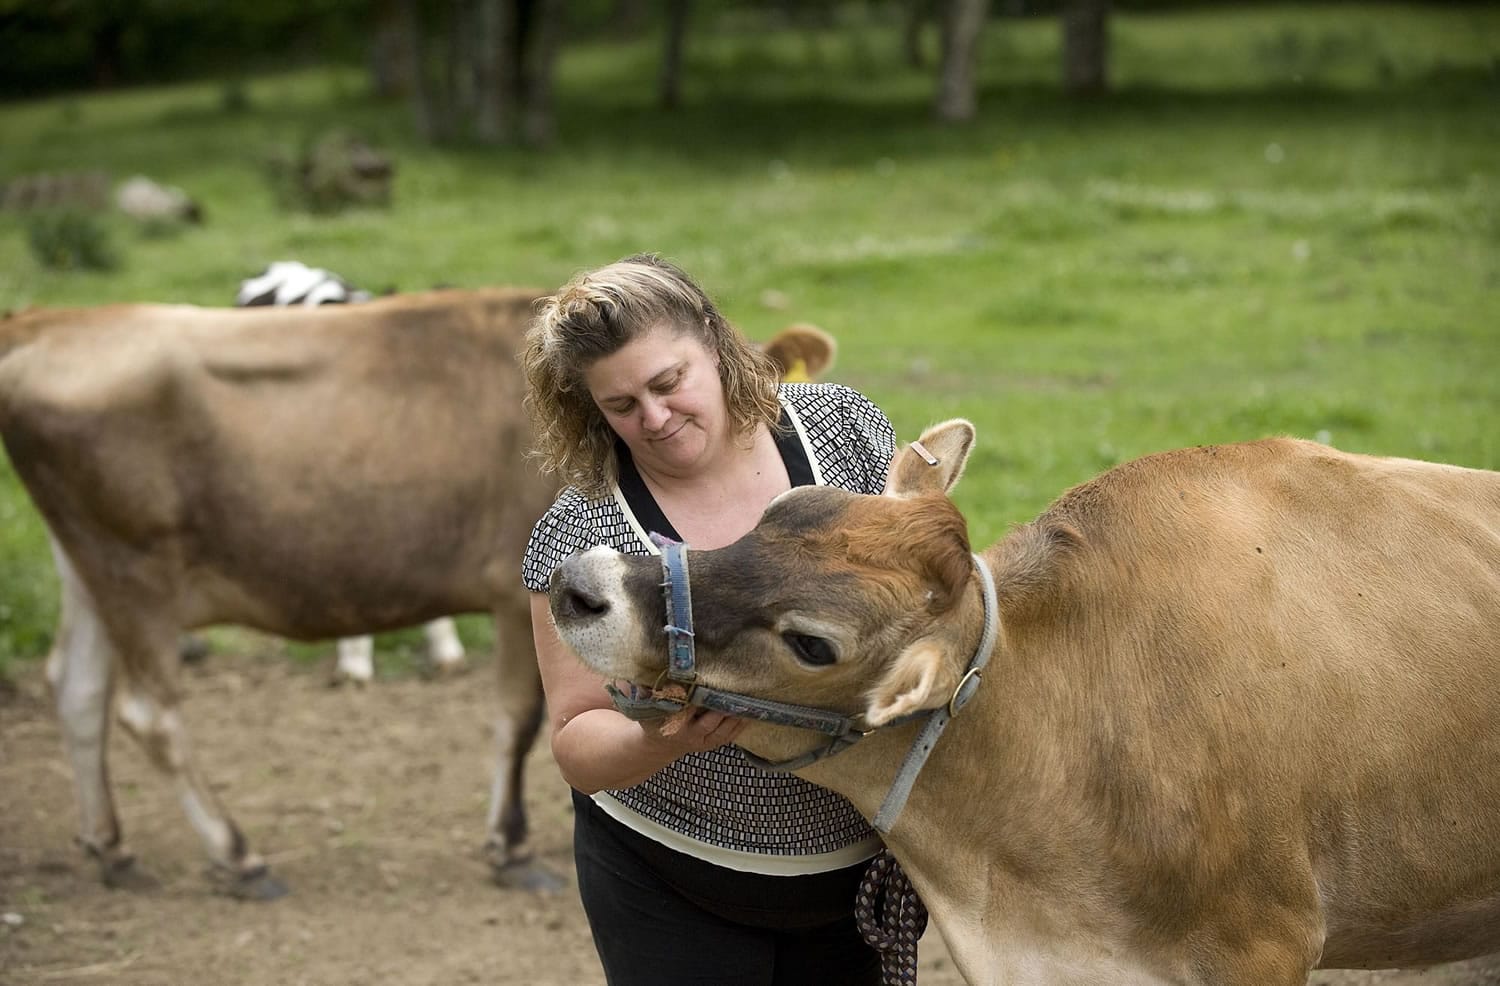 Tina Rodriguez tends to her livestock at Spanish Sonrise Dairy in Yacolt.